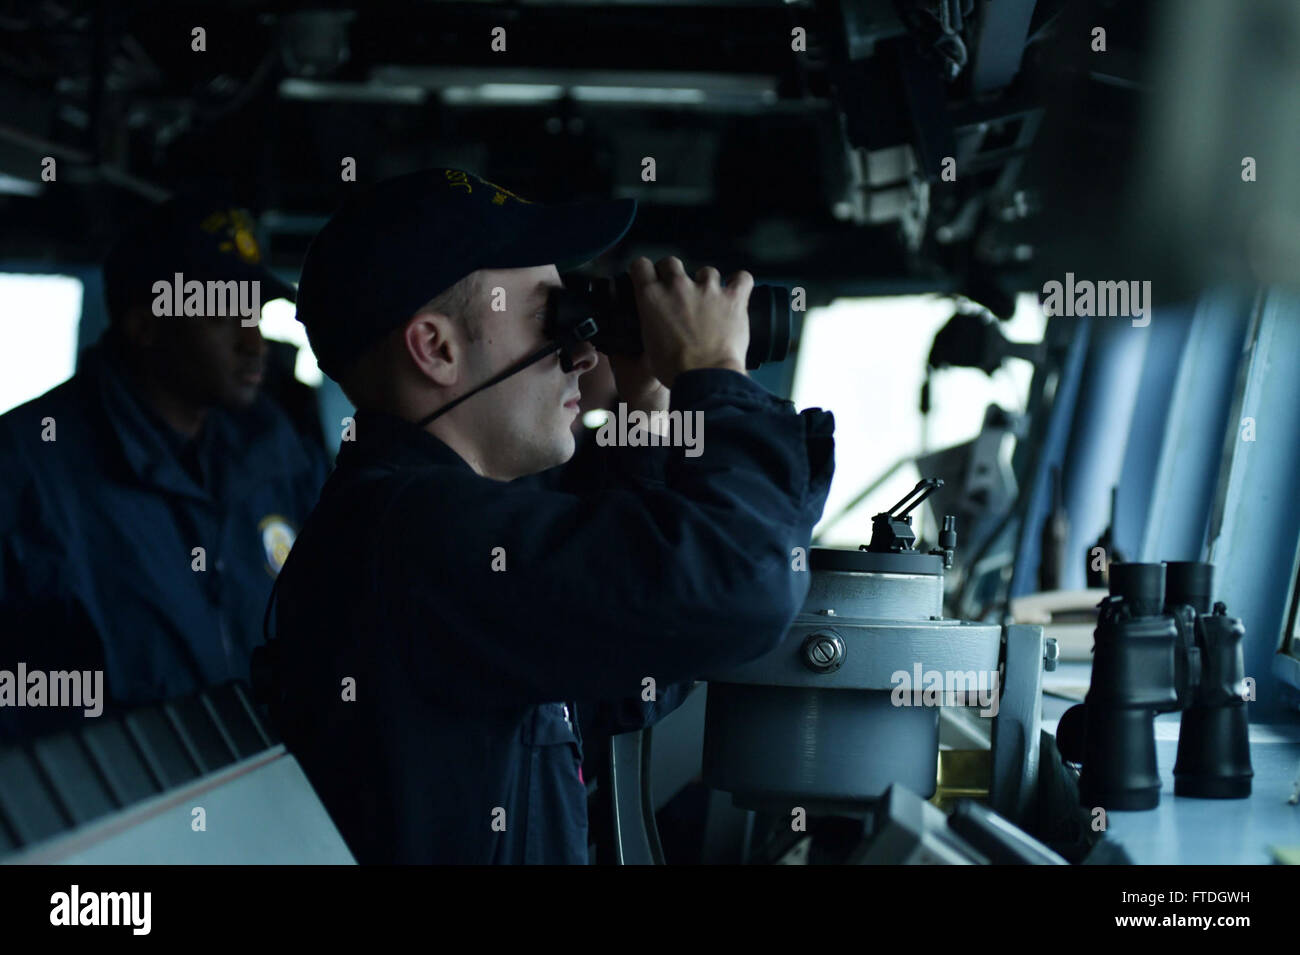 151020-N-XT273-413 ATLANTIC OCEAN (Oct. 20, 2015) Ensign Sean Mansfield checks for a clear range during the Maritime Theater Missile Defense (MTMD) Forum's at Sea Demonstration (ASD-15) aboard the Arleigh Burke-class destroyer USS Ross (DDG 71). Ships from Canada, France, Italy, The Netherlands, Norway, Spain, United Kingdom, and the United States tracked and destroyed target ballistic and anti-ship cruise missiles during the demonstration's six-live fire scenarios. Germany provided personnel to the multi-national Combined Task Group staff. (U.S. Navy photo by Mass Communication Specialist 2nd Stock Photo